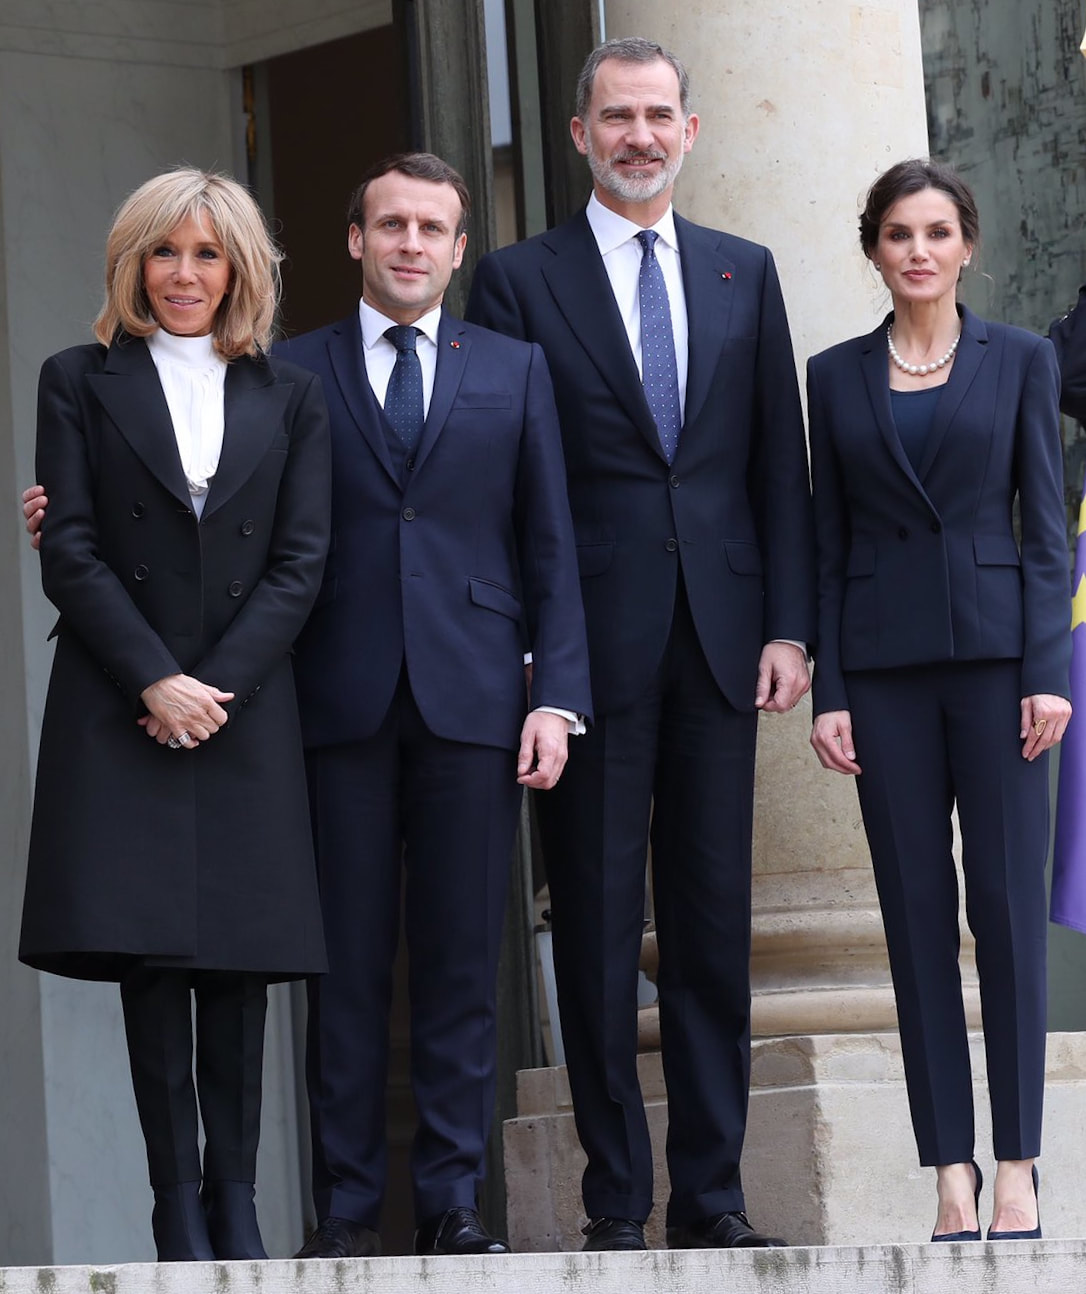 King Felipe VI and Queen Letizia of Spain attend a lunch hosted by the president of the French Republic, Emmanuel Macron and First Lady Brigitte Macron at Elysee Palace upon their arrival in Paris 11 March 2020